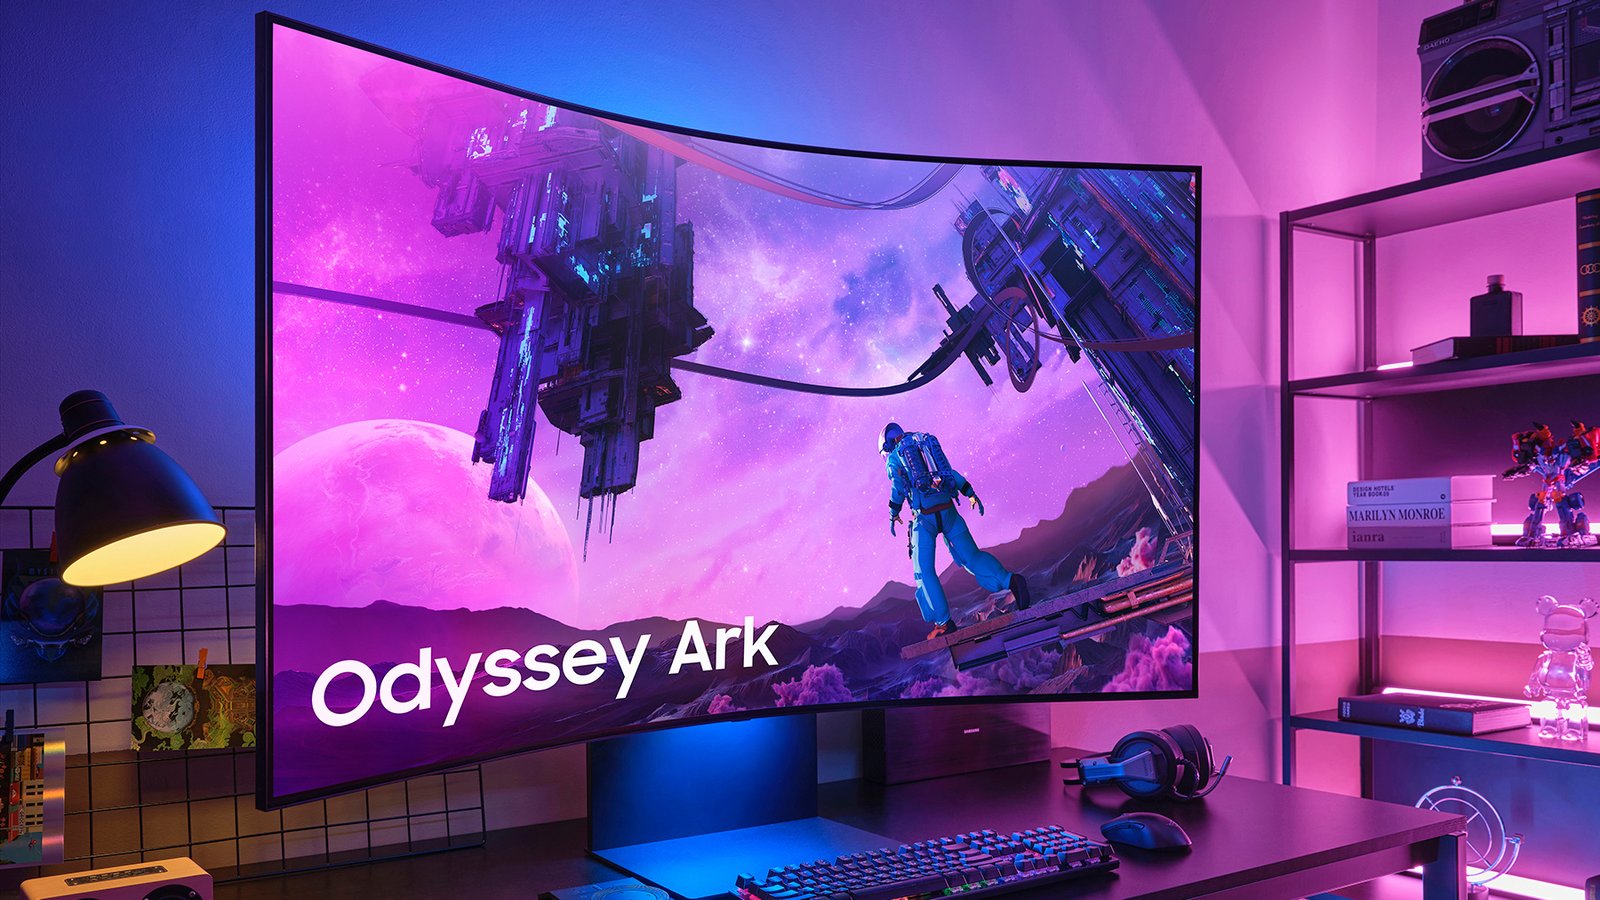 Save $1,200 on the Samsung Odyssey Ark gaming monitor